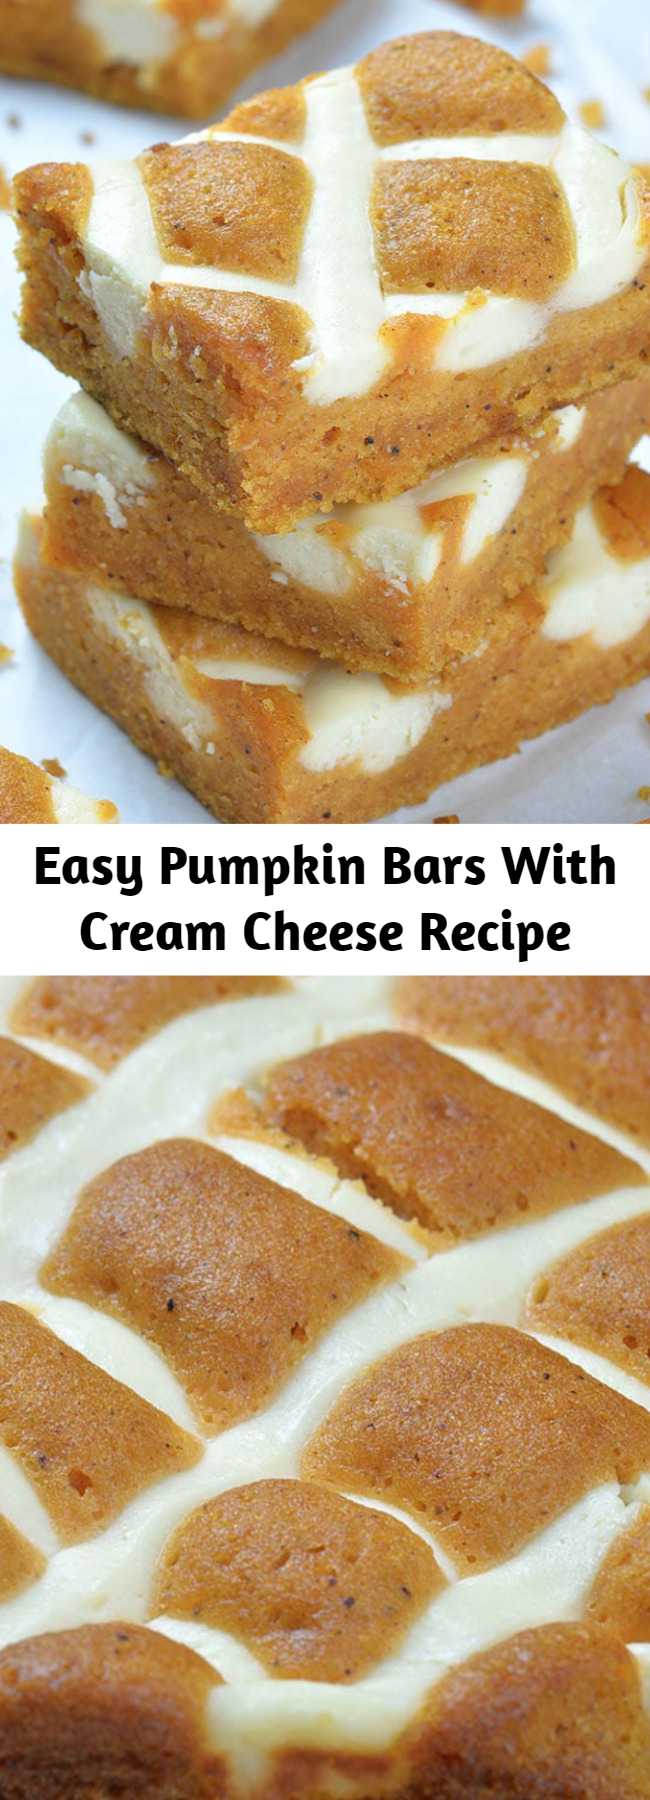 Easy Pumpkin Bars With Cream Cheese Recipe - Pumpkin Bars with Cream Cheese is simple and easy dessert recipe for fall baking season. Moist and spicy pumpkin bars are delicious breakfast or snack. But this crowd-pleasing treat is fancy enough to be served as a dessert at Halloween party or as light and easy dessert after Thanksgiving dinner.